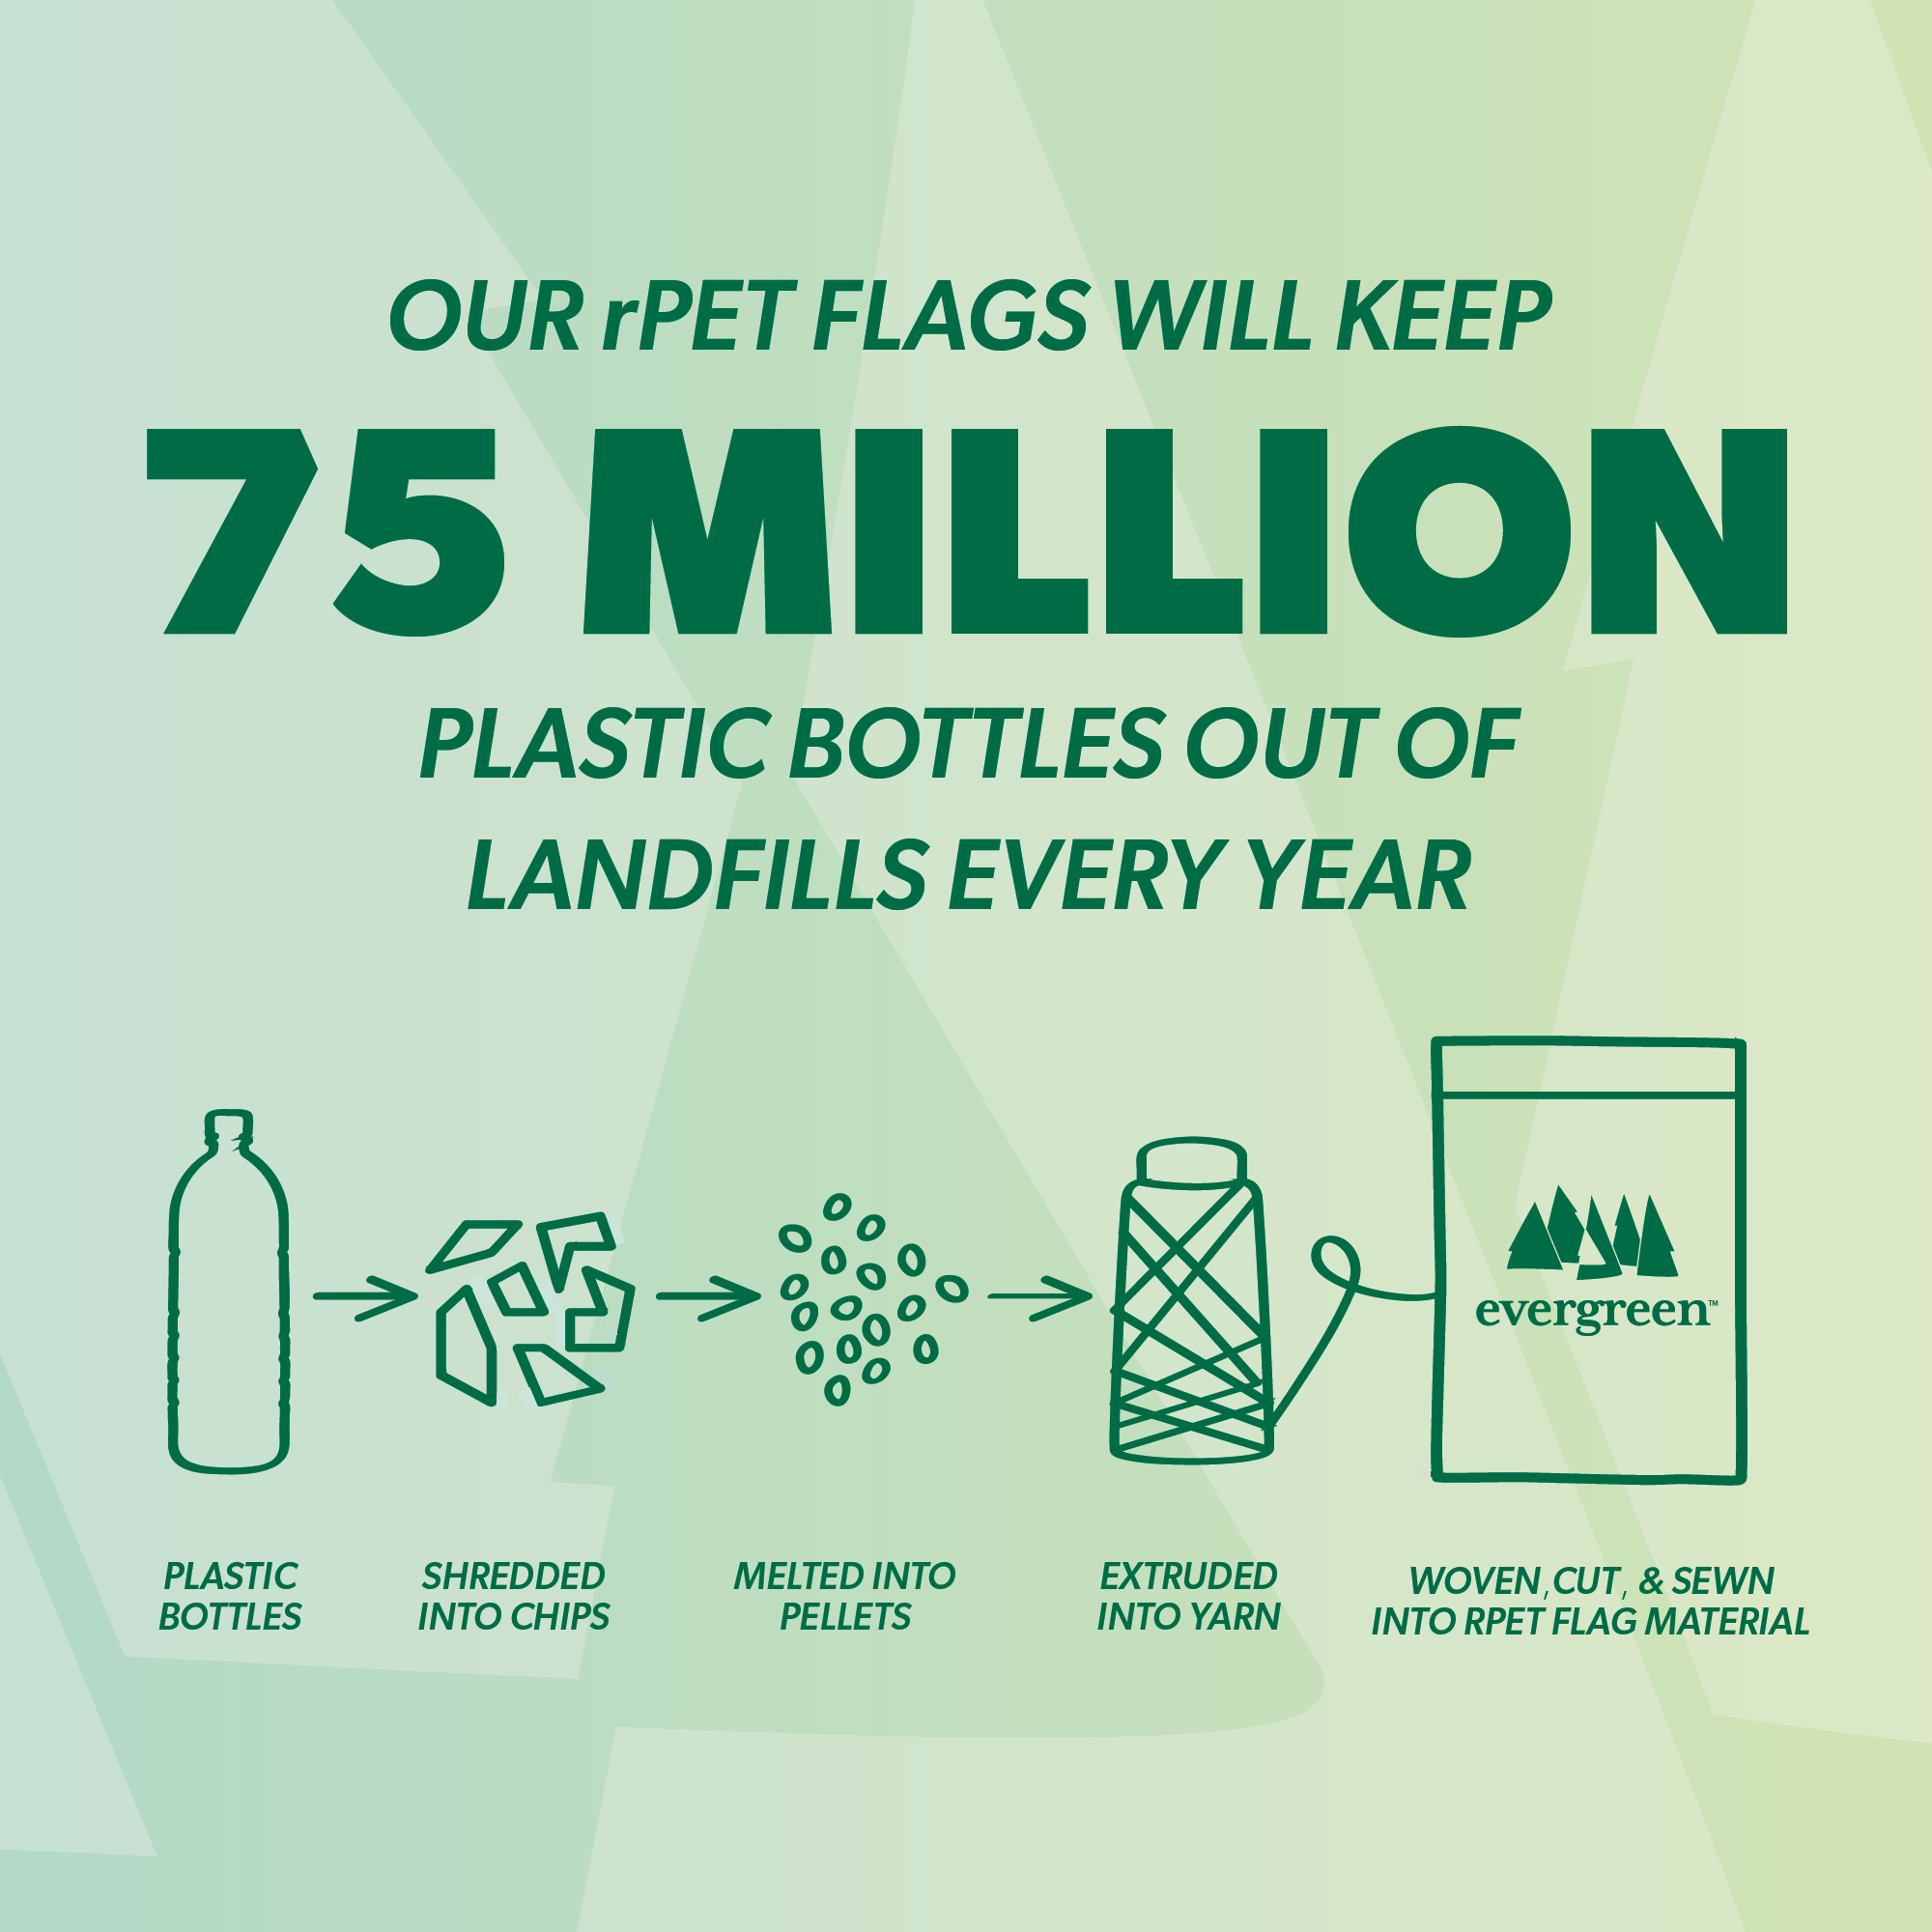 Evergreen Enterprises will make 100% of its iconic home and garden flags from recycled plastic, an initiative that will help keep over 75 million plastic bottles from entering landfills every year. 